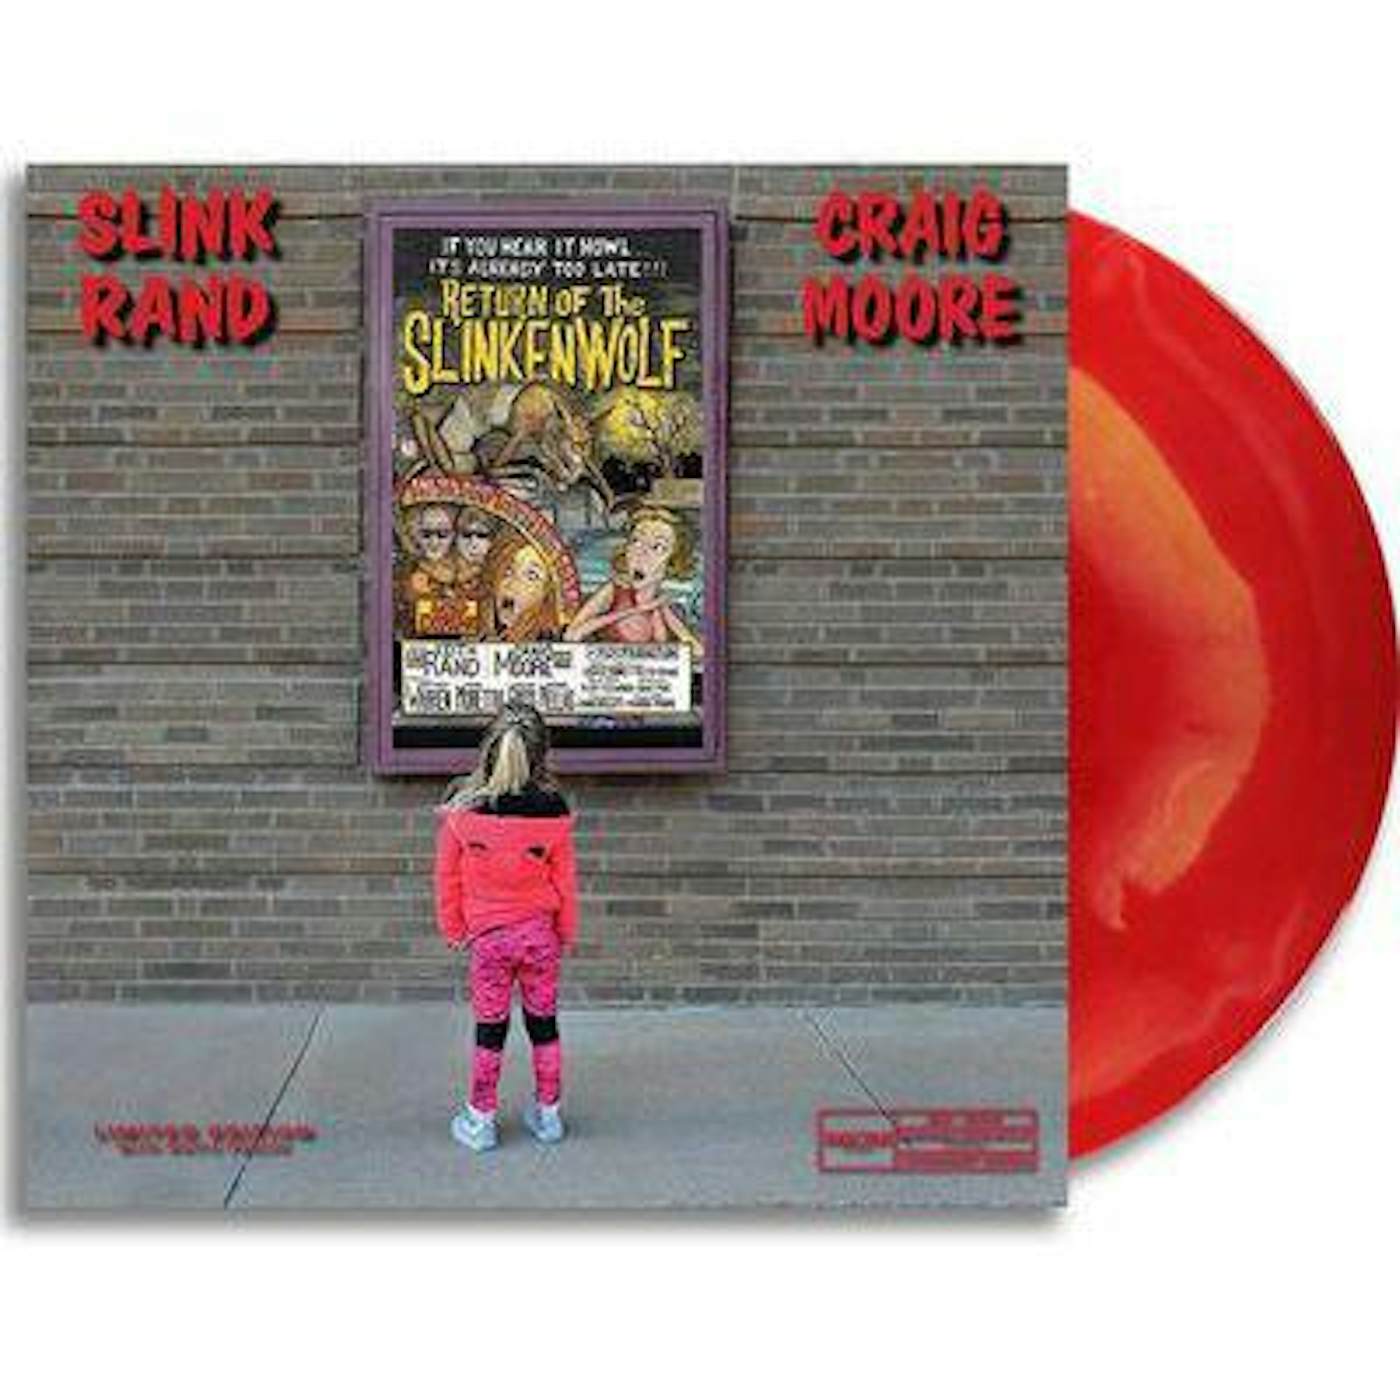 Slink Rand & Craig Moore Return Of The Slinkenwolf - Limited Edition Bloody Red Colored Vinyl Record